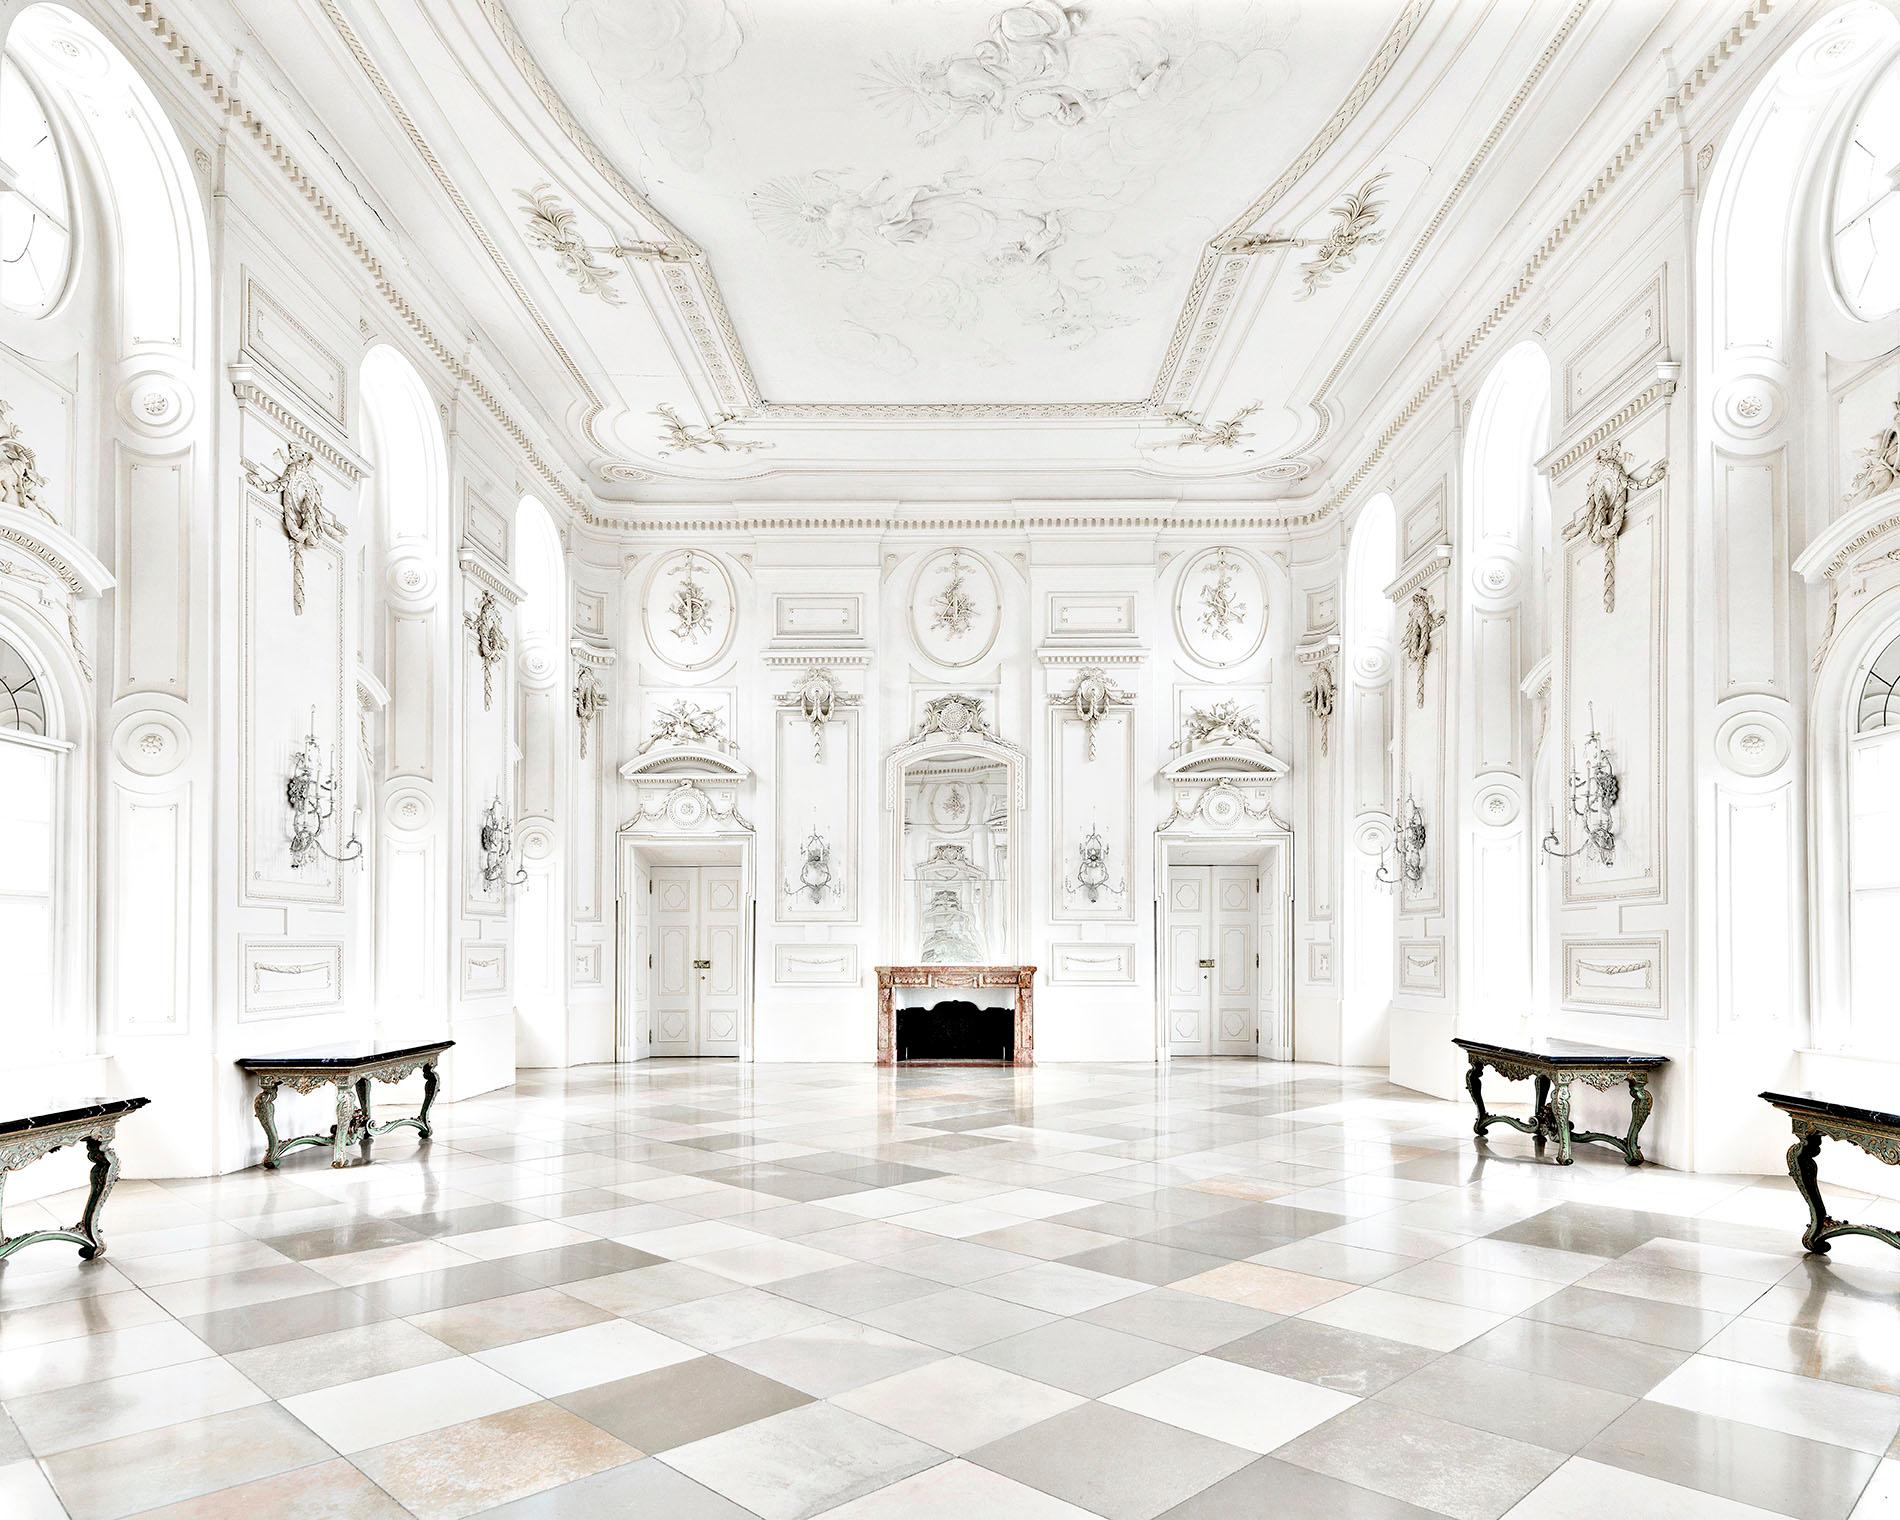 Palazzo Schloss Hof III Vienna 2016
Lambda c print 
Signed, titled, dated and numbered (edition of 5) on artist's label on verso.  
Framing options also avaialble

The photographer is based in Florence, and is fascinated how his architectural